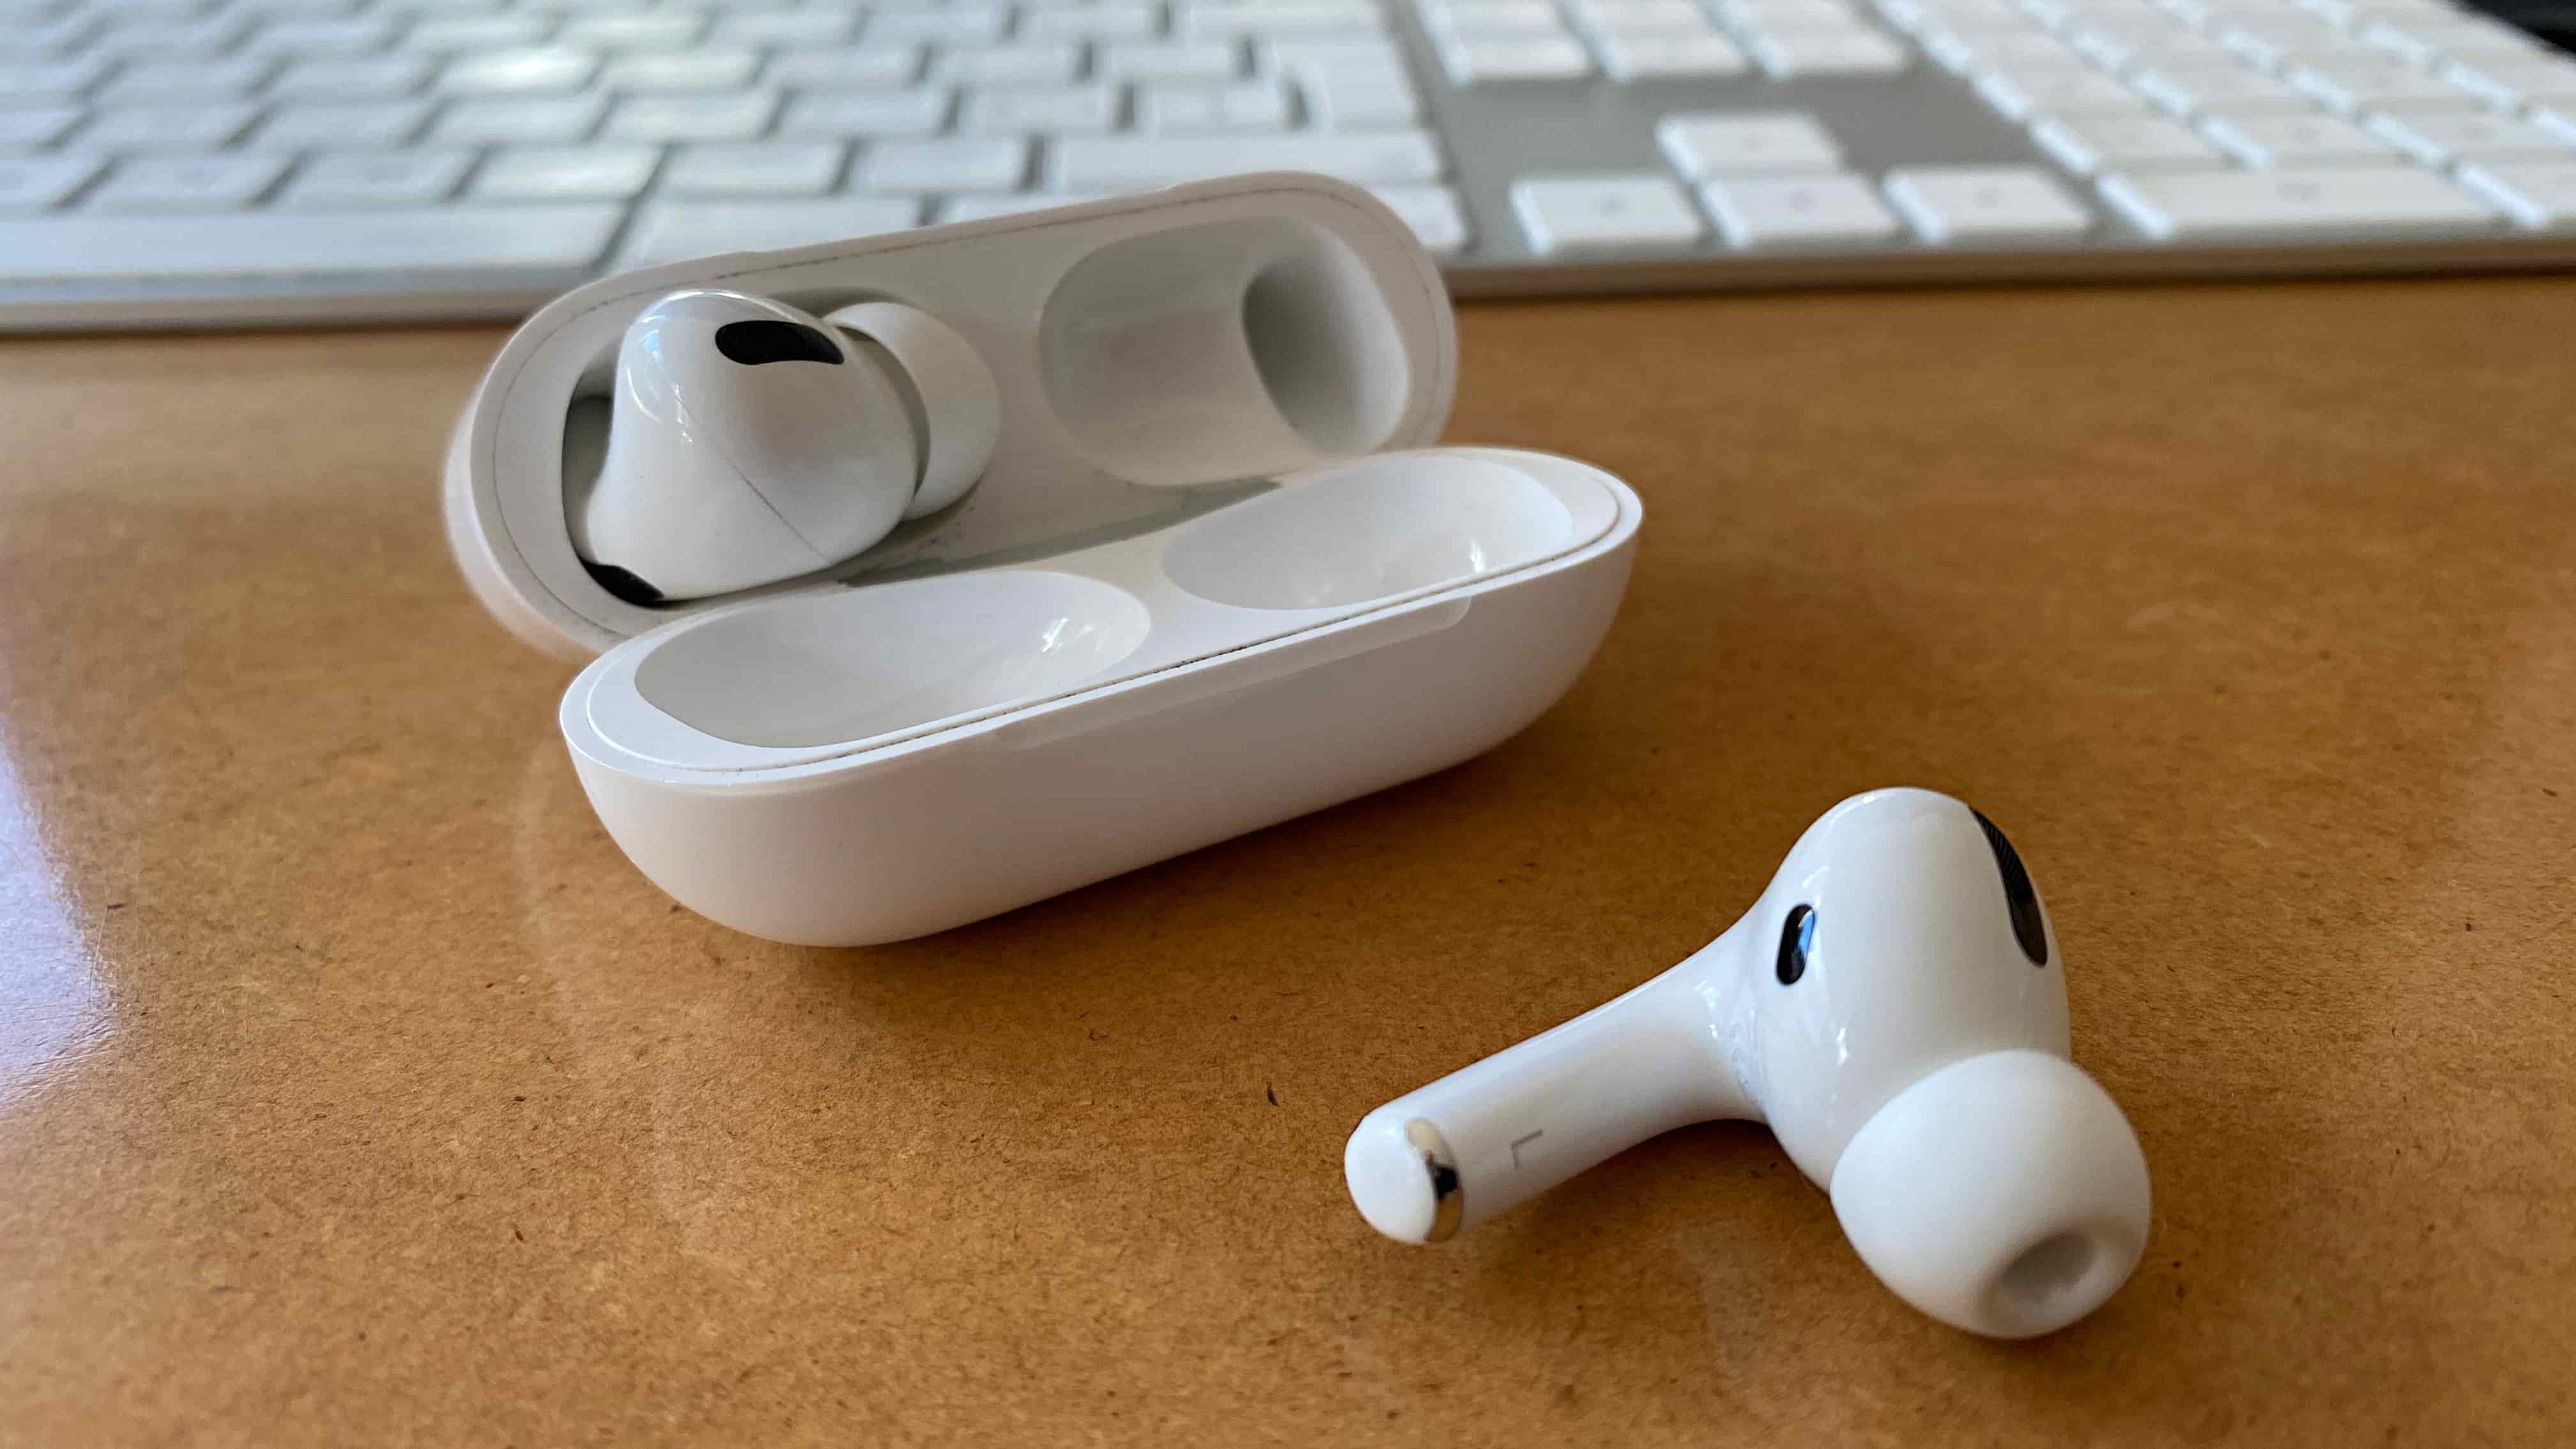 AirPods Pro with left AirPod out of the box